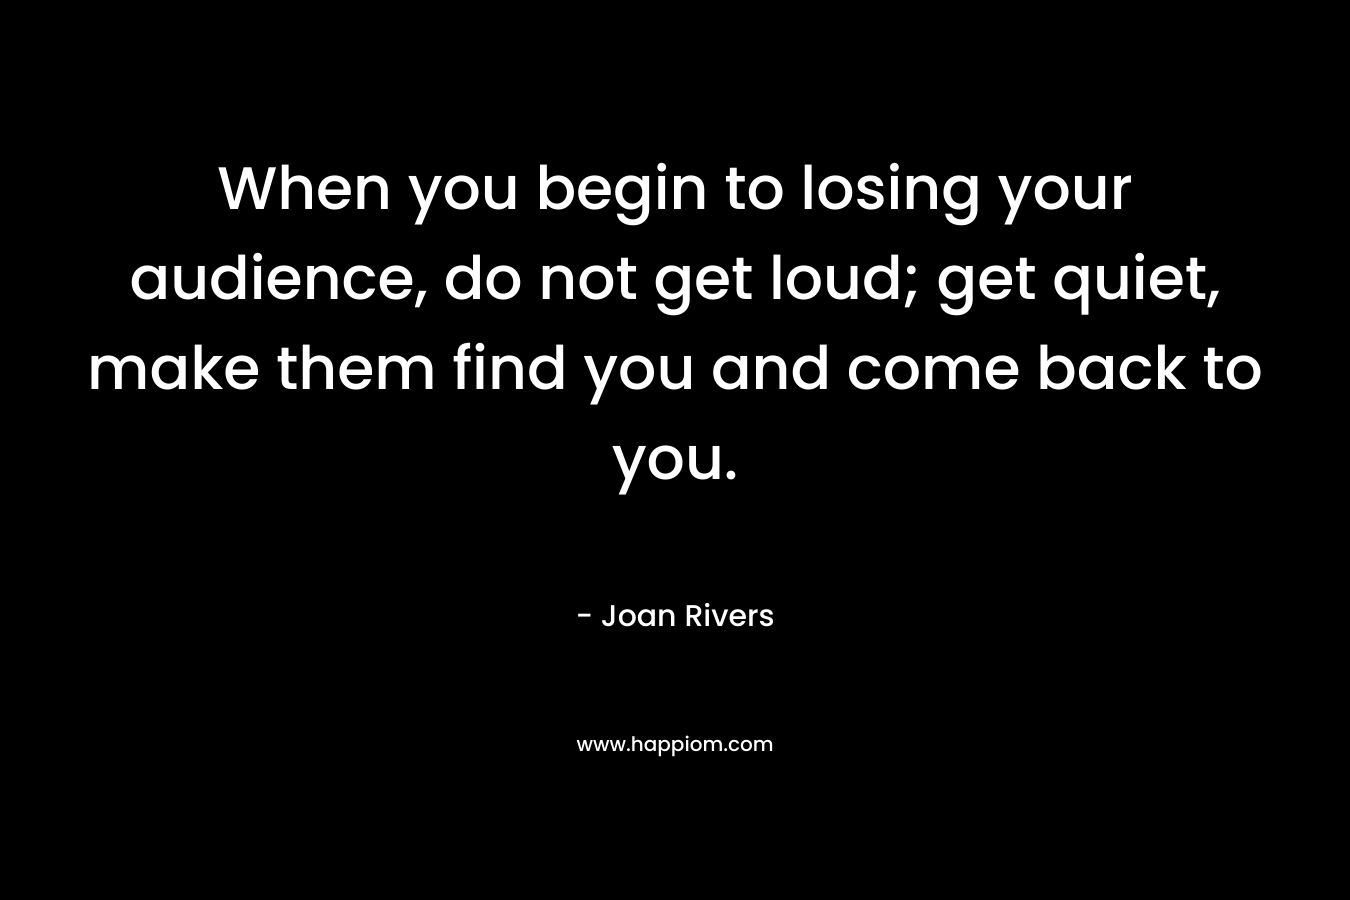 When you begin to losing your audience, do not get loud; get quiet, make them find you and come back to you.